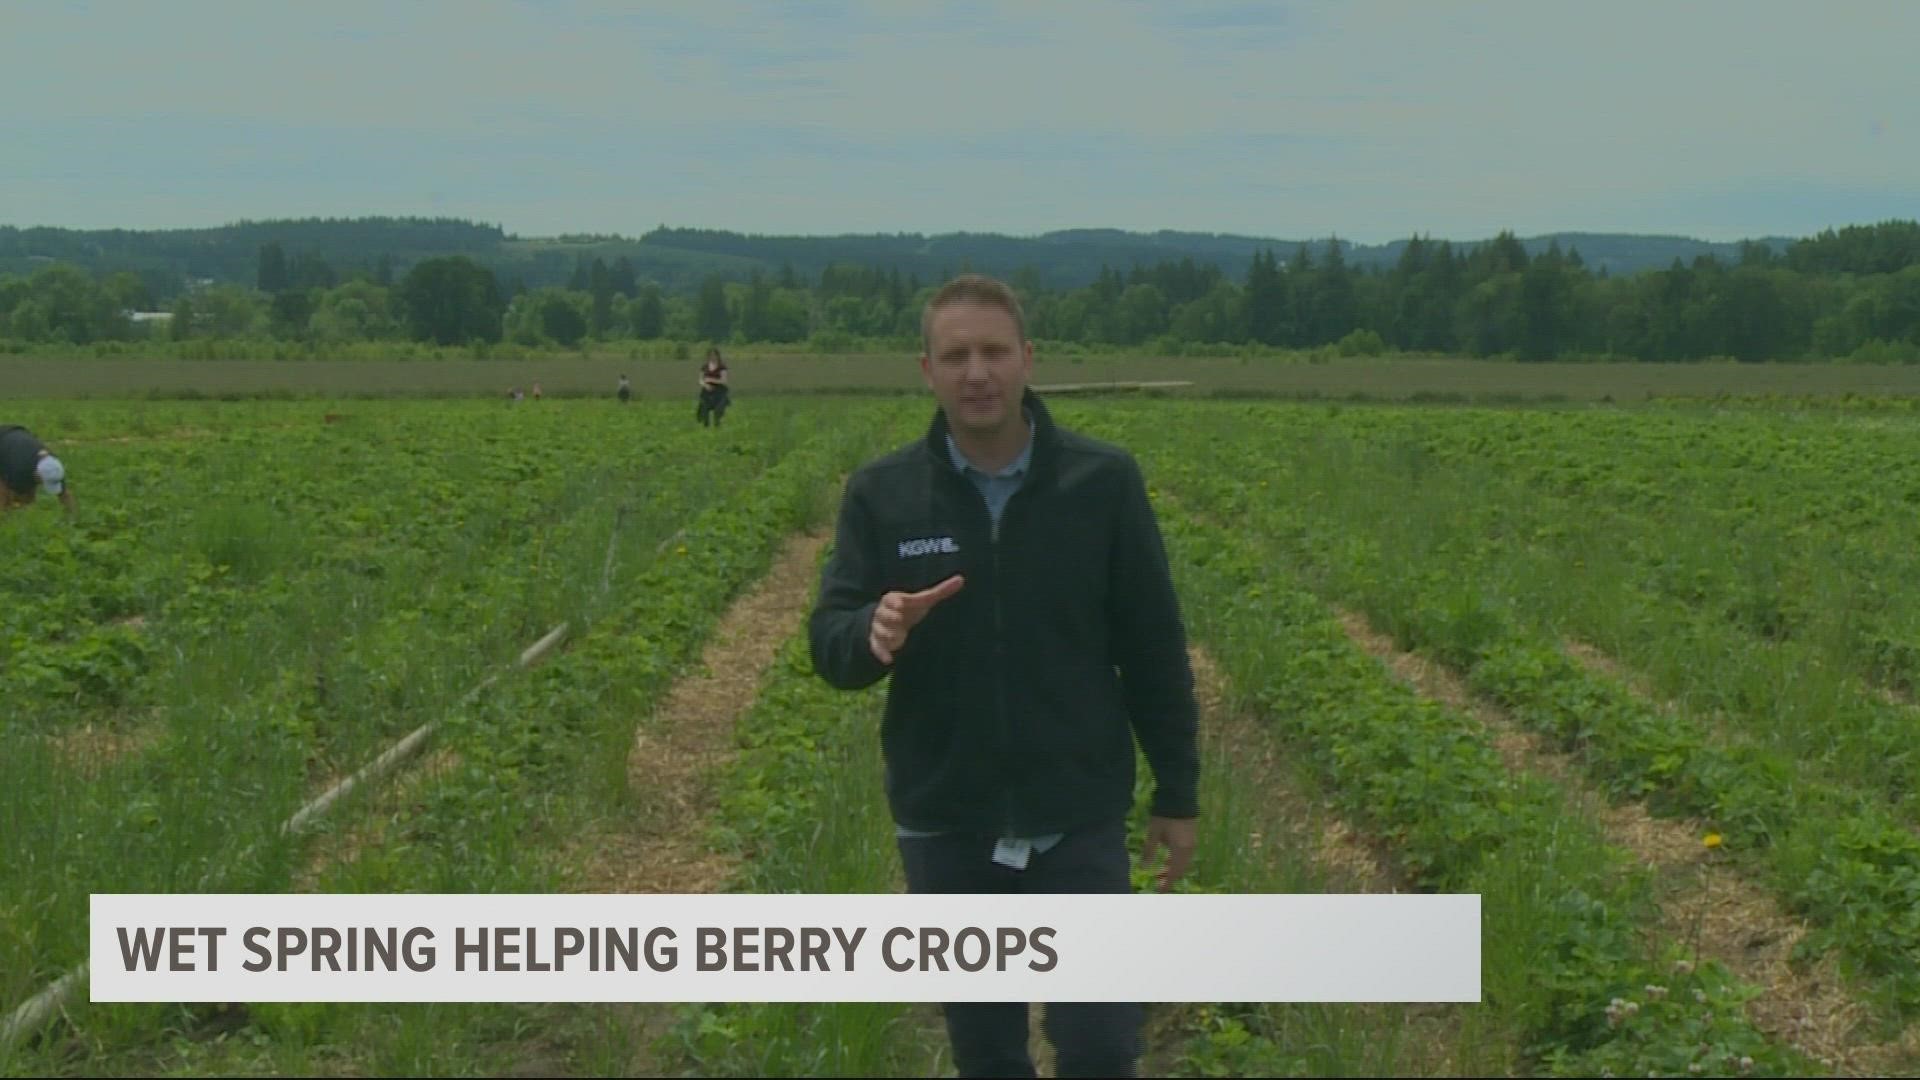 Recordsetting rain helping Willamette Valley strawberry growers